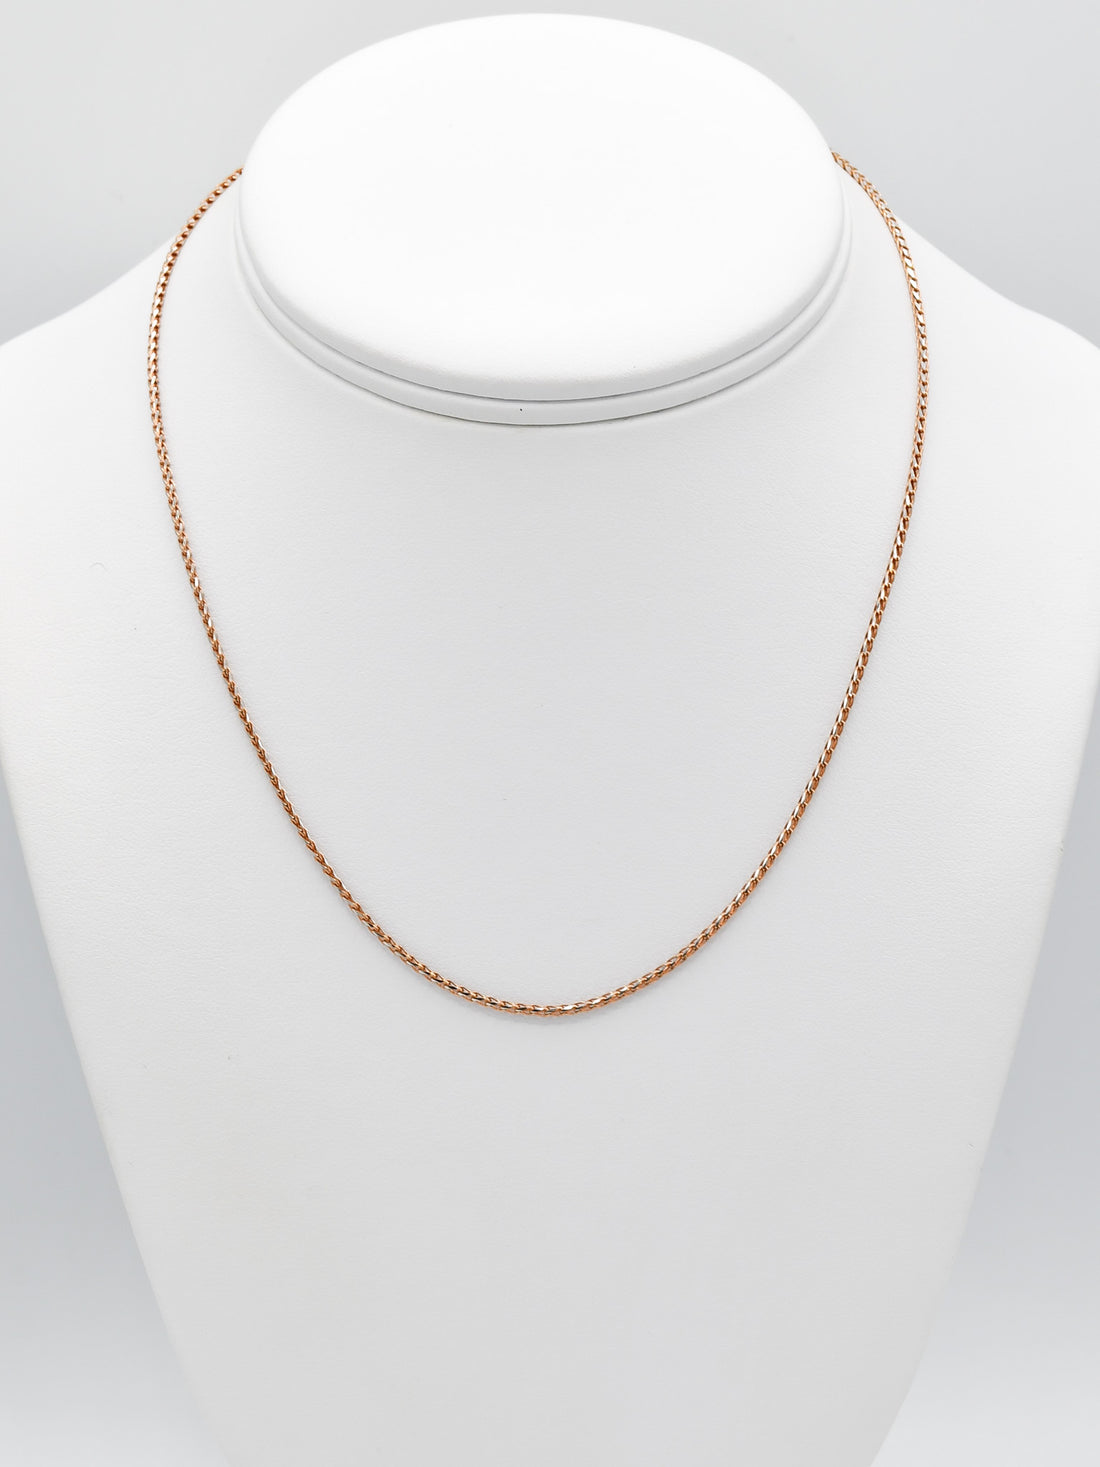 22ct Rose Gold Chain - Roop Darshan